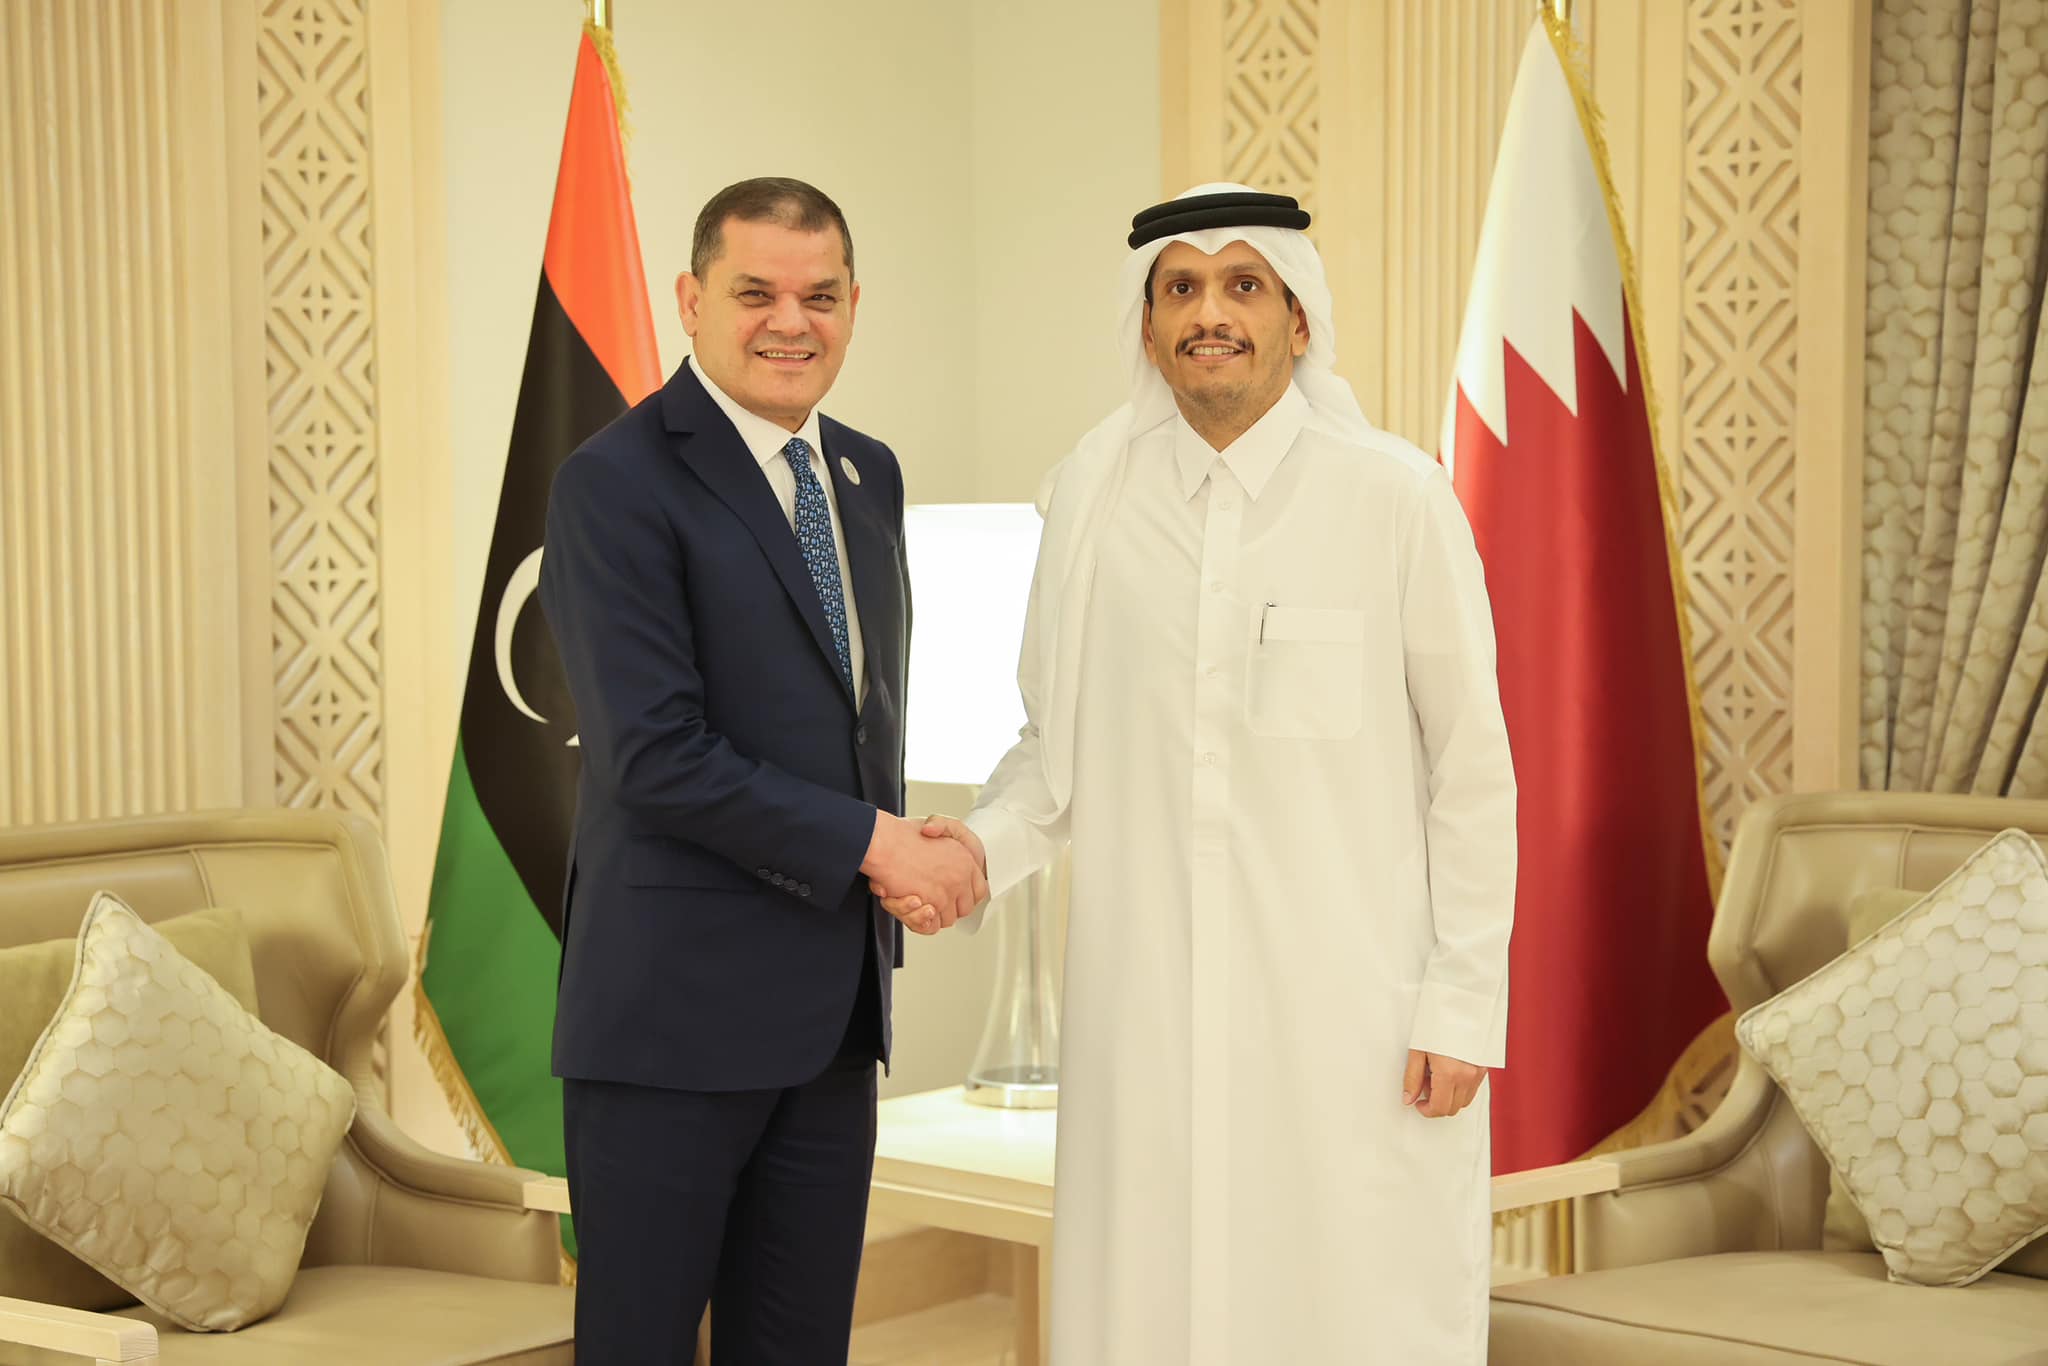  The Prime Minister of the National Unity Government discusses with the Qatari Foreign Minister regional and international developments in Doha.